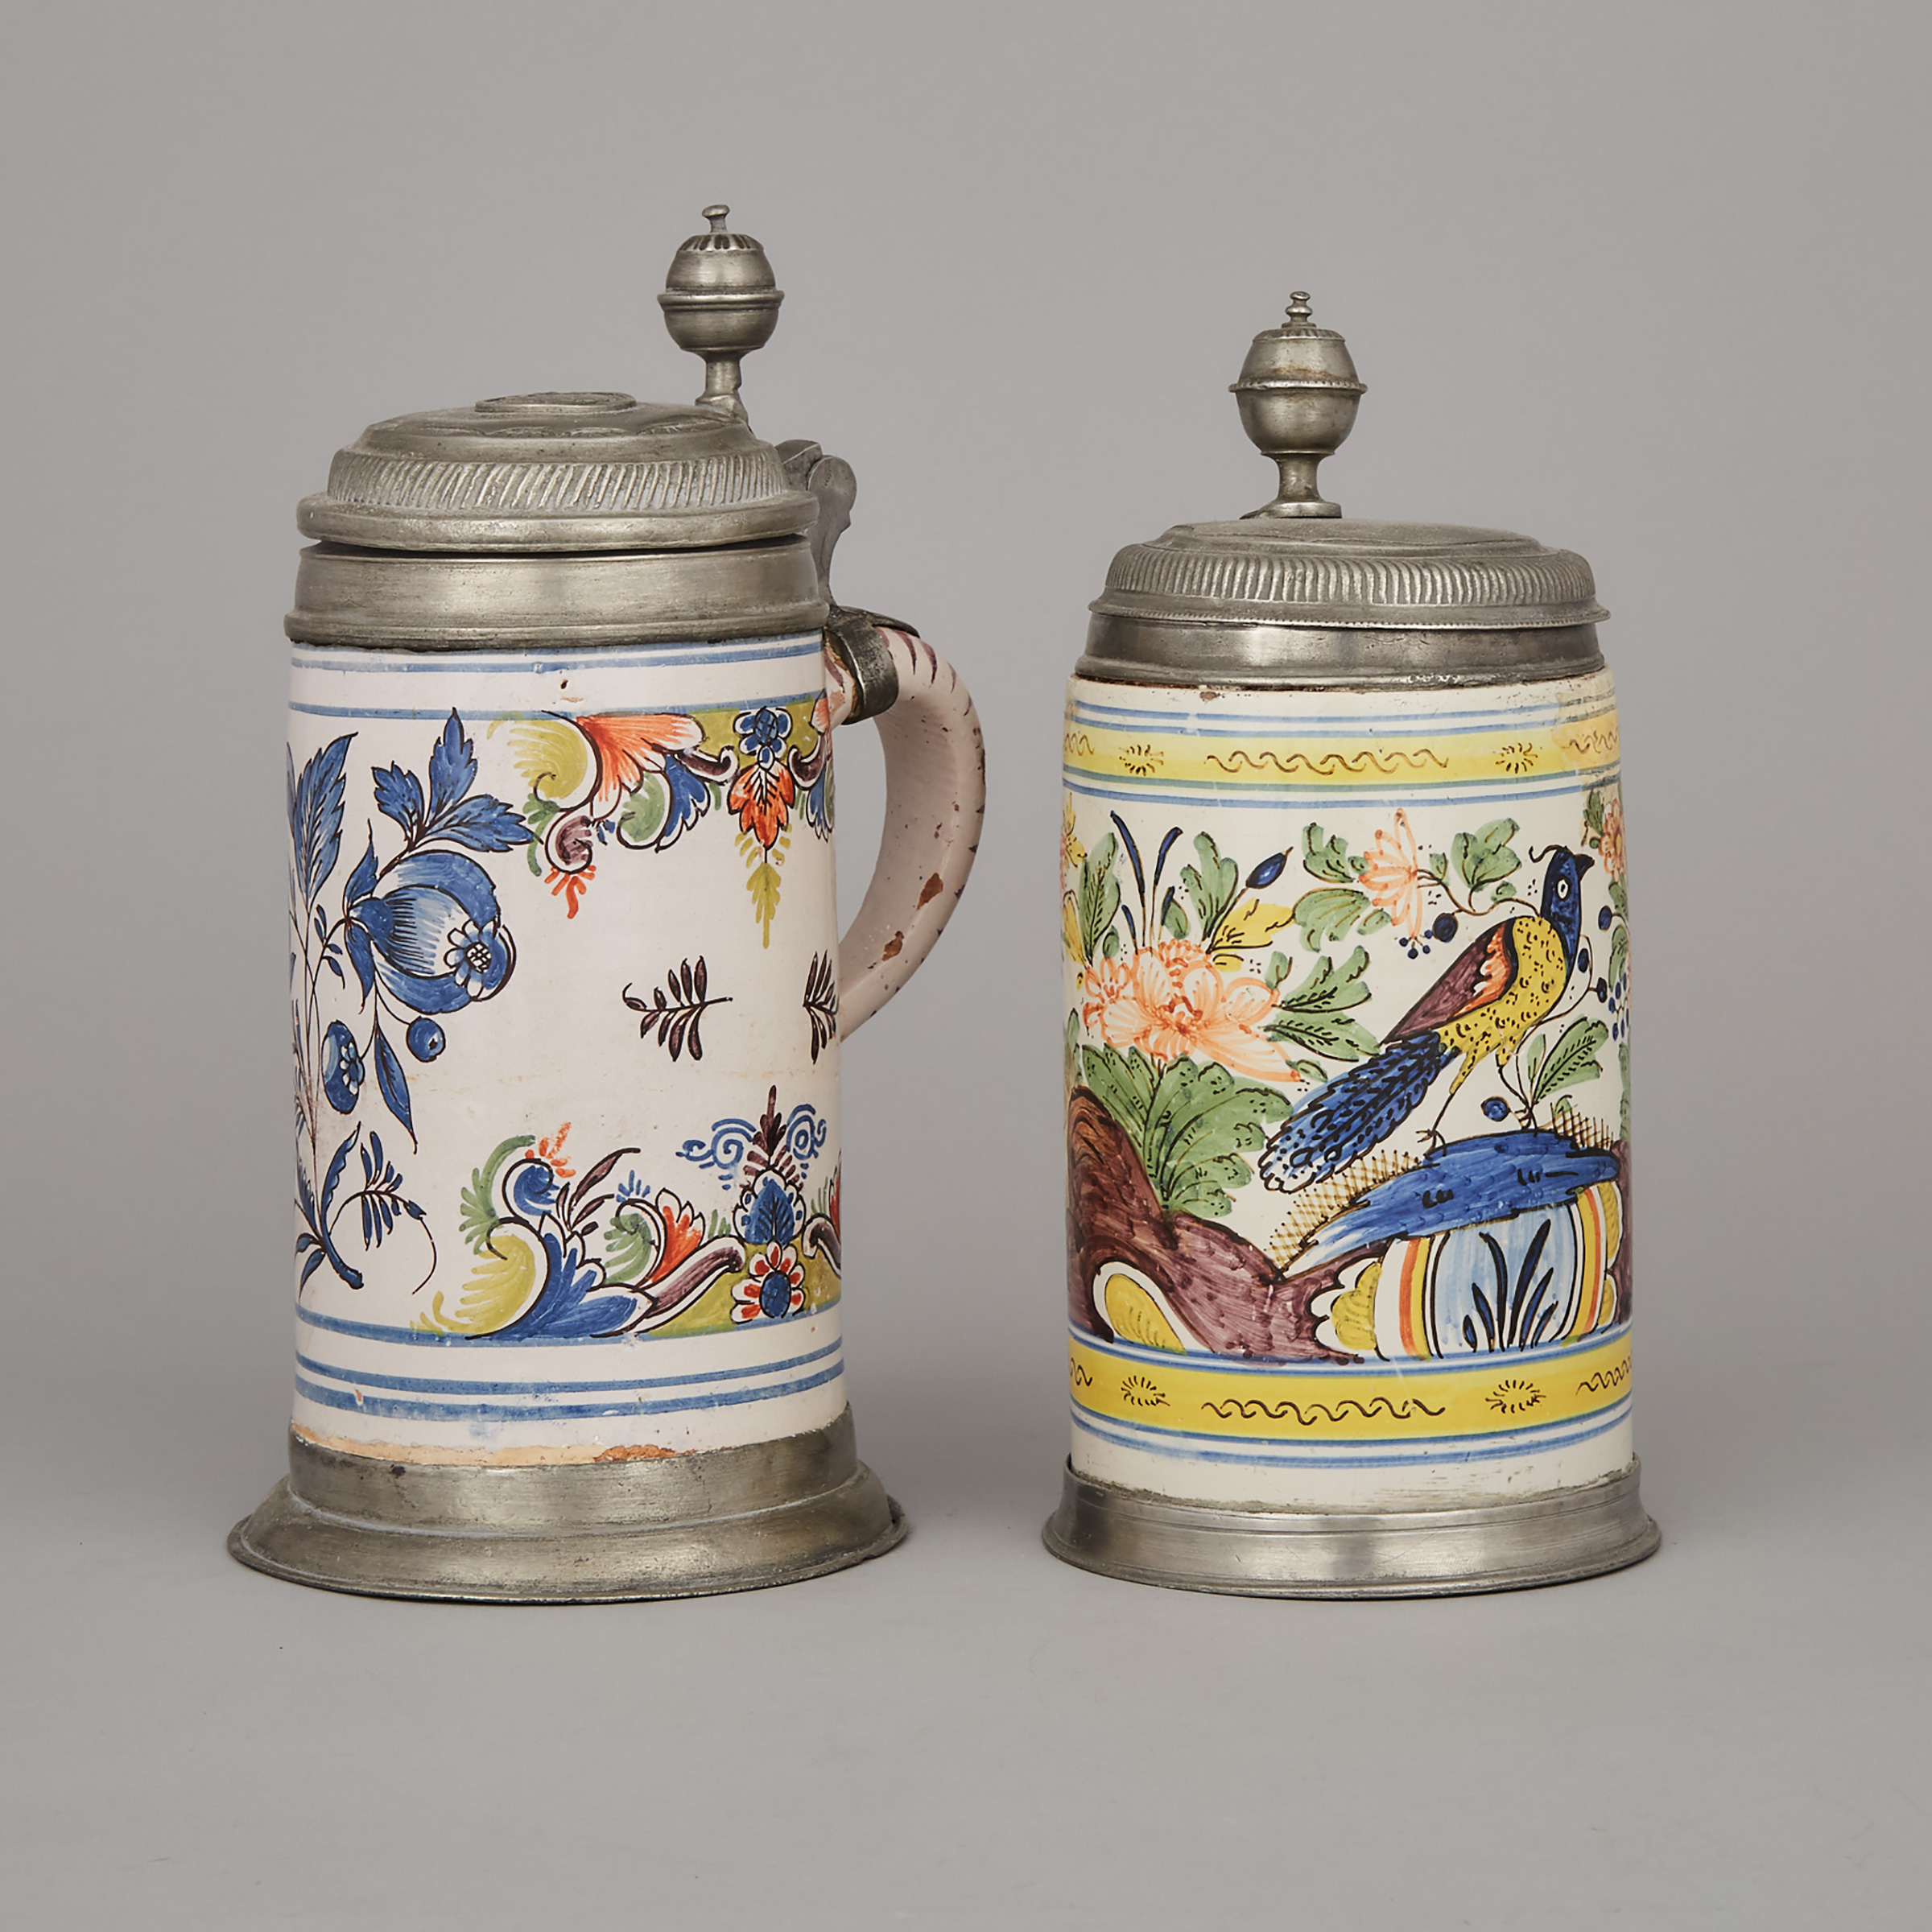 Two German Pewter Mounted Faience Steins, late 18th century